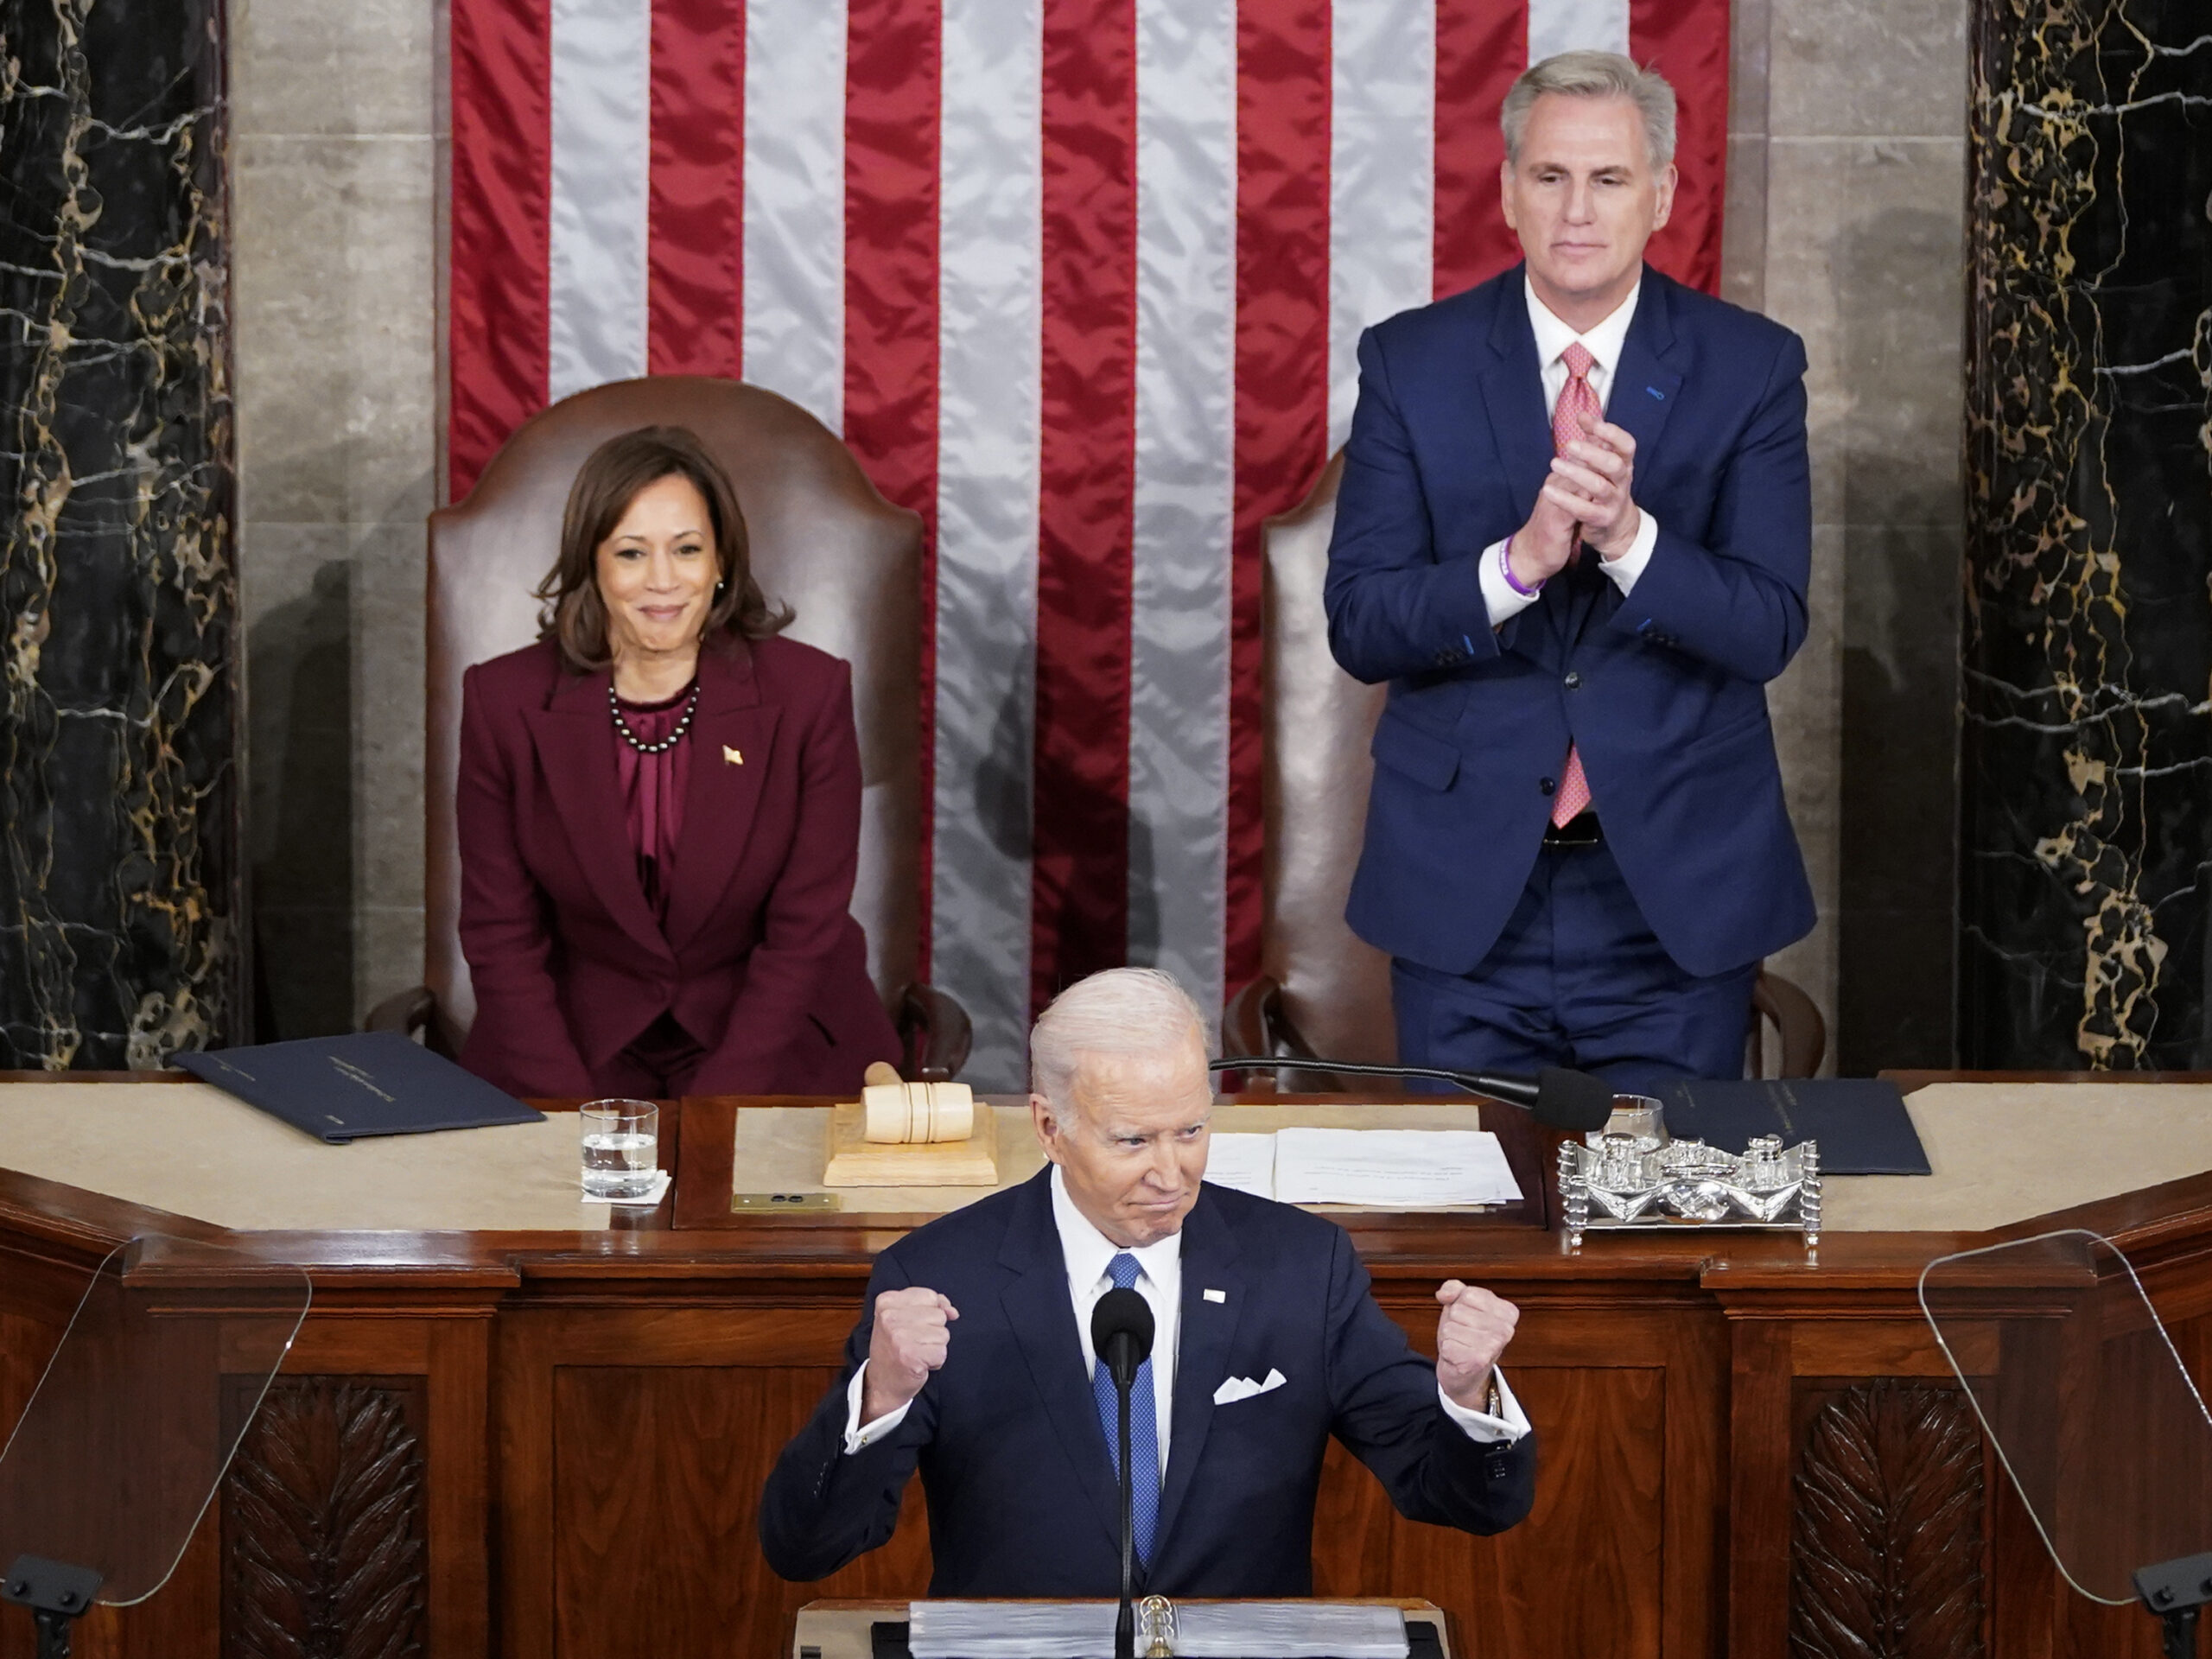 three people at desks, with the american flag in the background